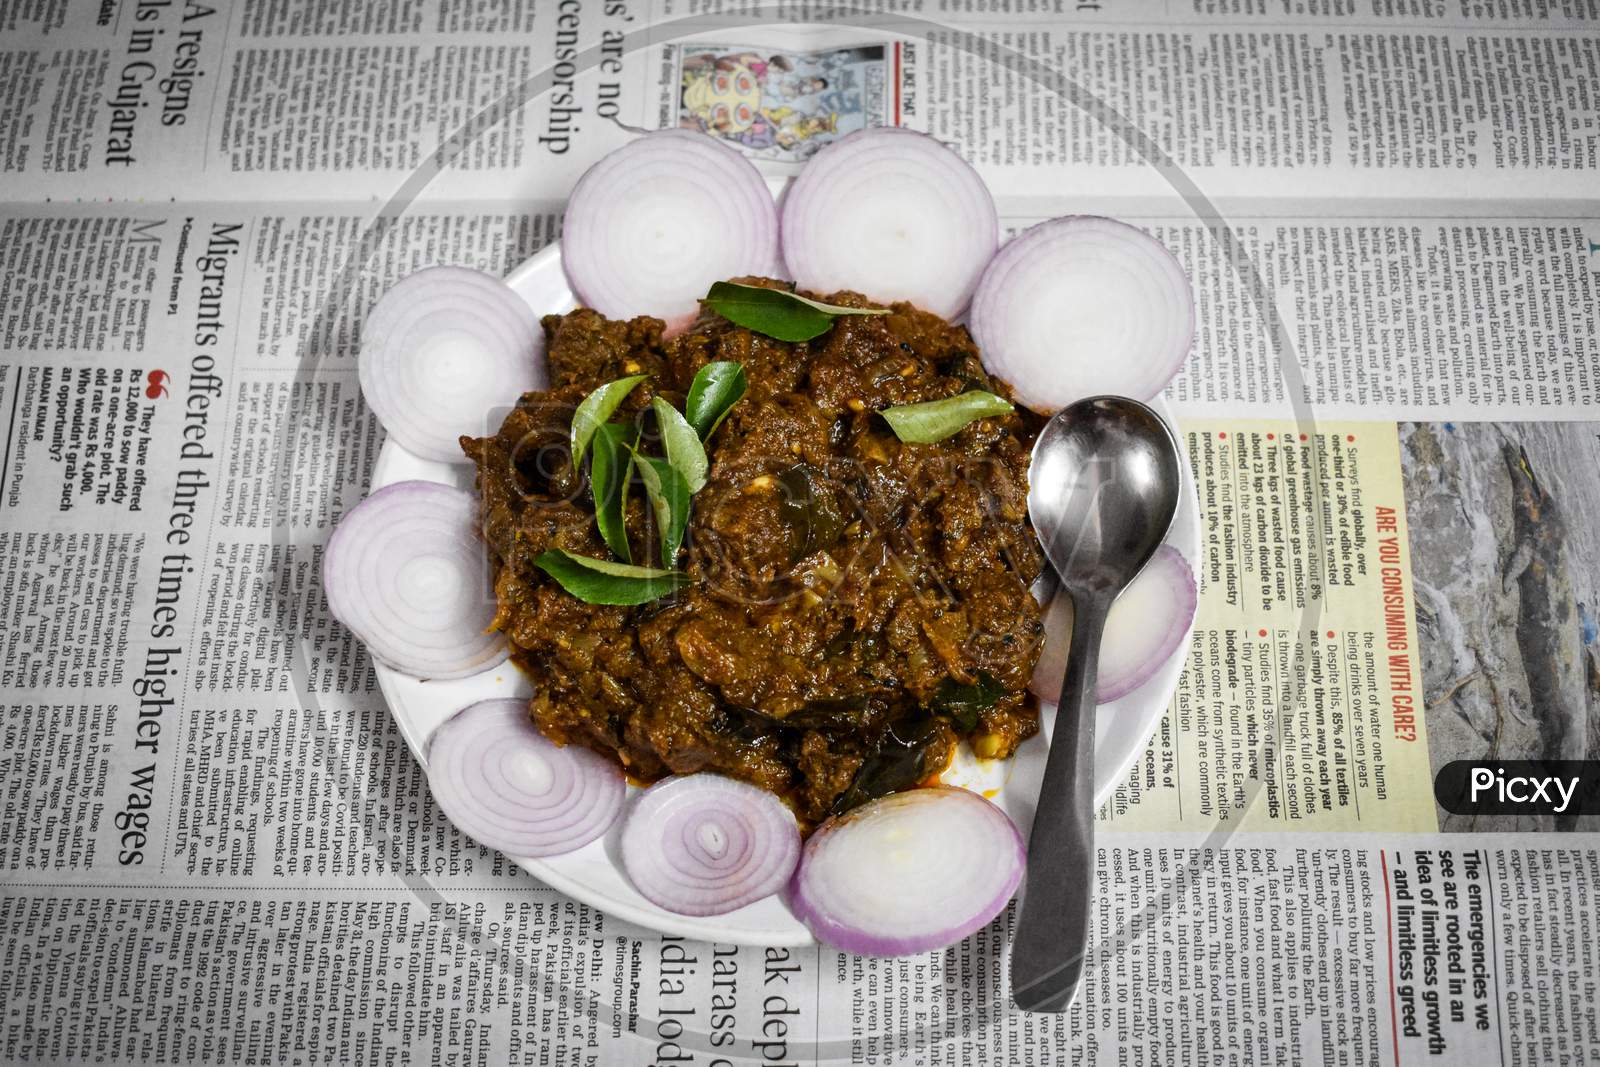 06/06/2020-Kerala, India: South Indian Cuisine Kerala Style Beef Fry / Roast. Traditional Style Meat Roast. Garnished With Onion Slices And Curry Leaves On Newspaper Background.